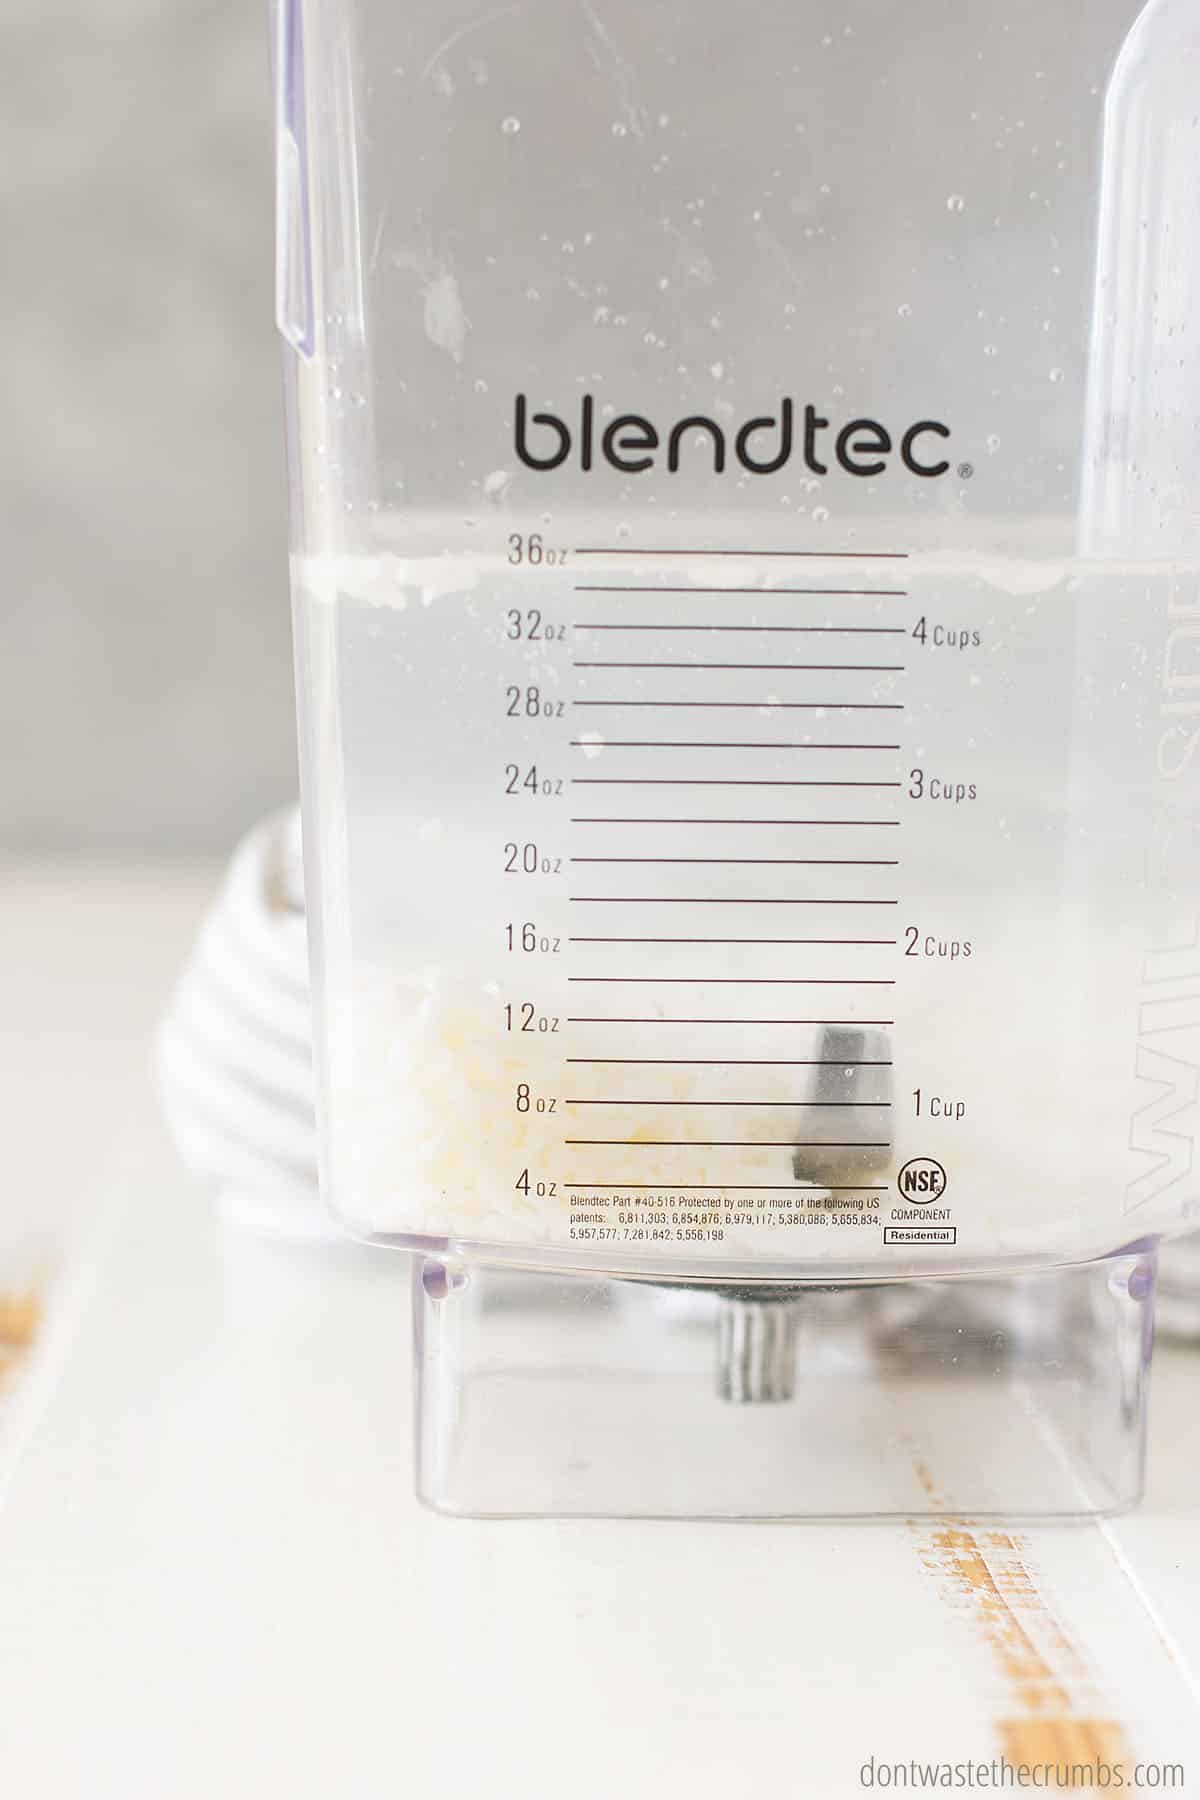 Water and rice in a blender